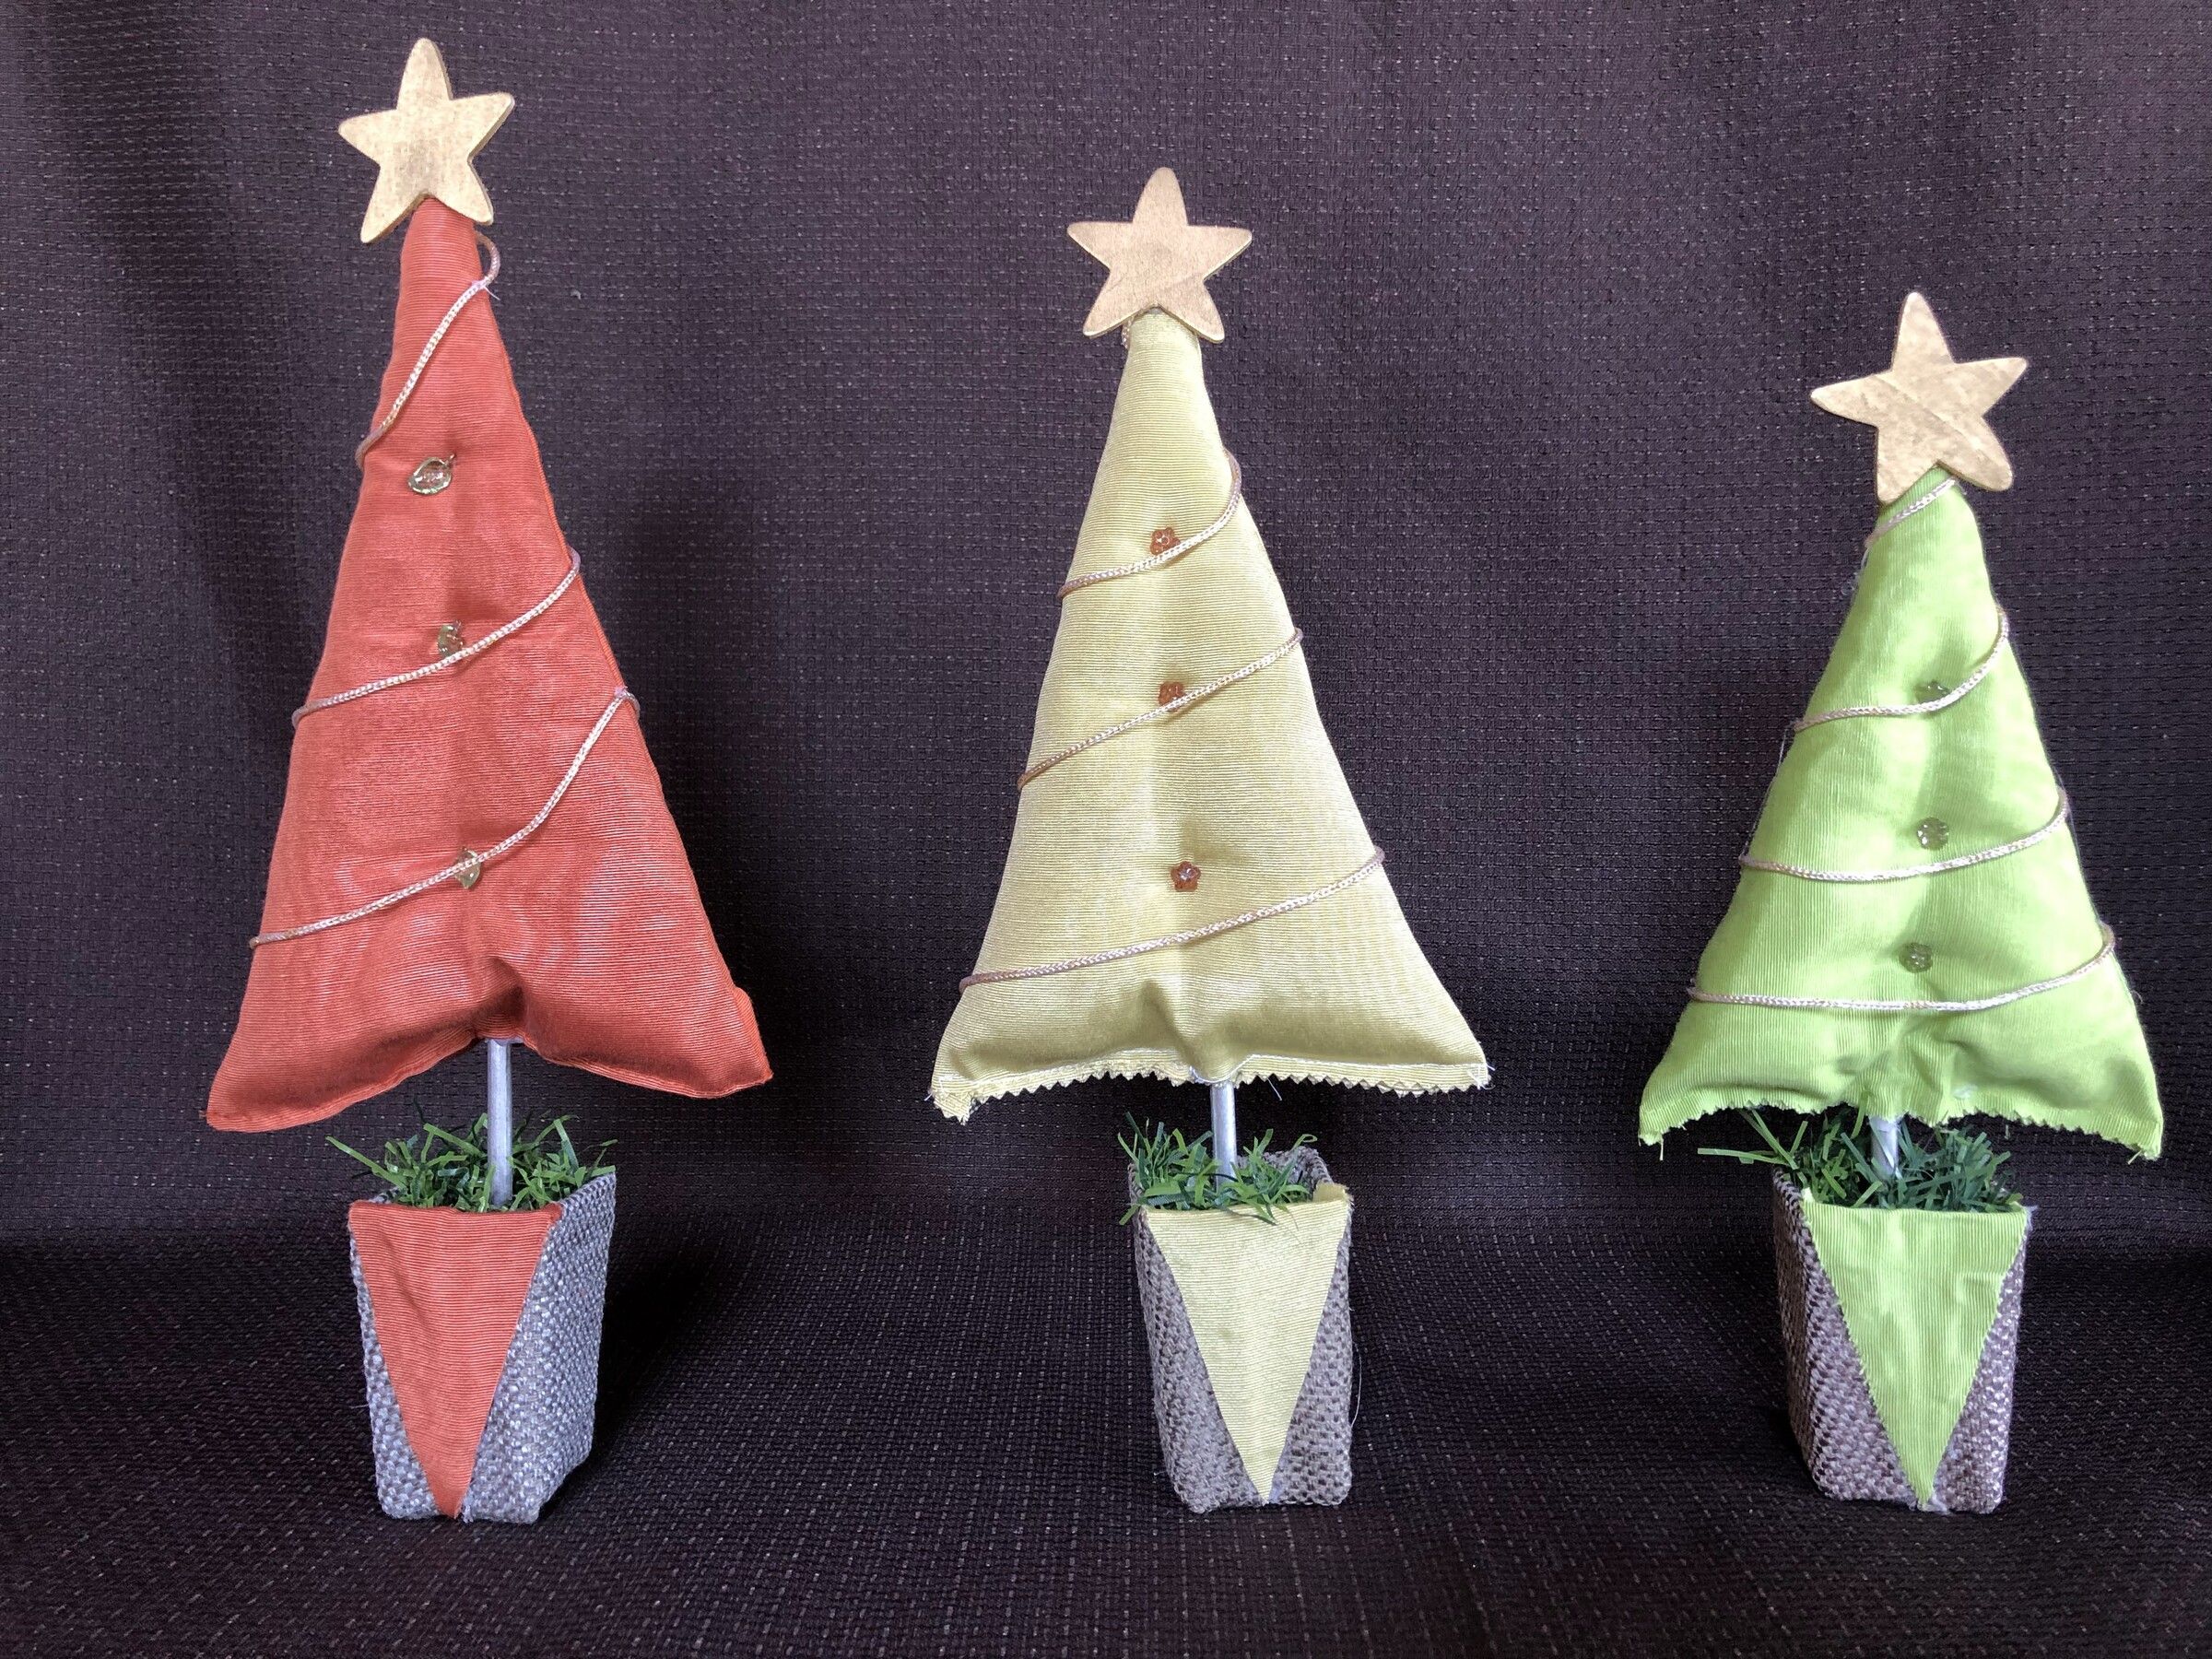 Set of 3 Christmas trees - Code 47 SOLD